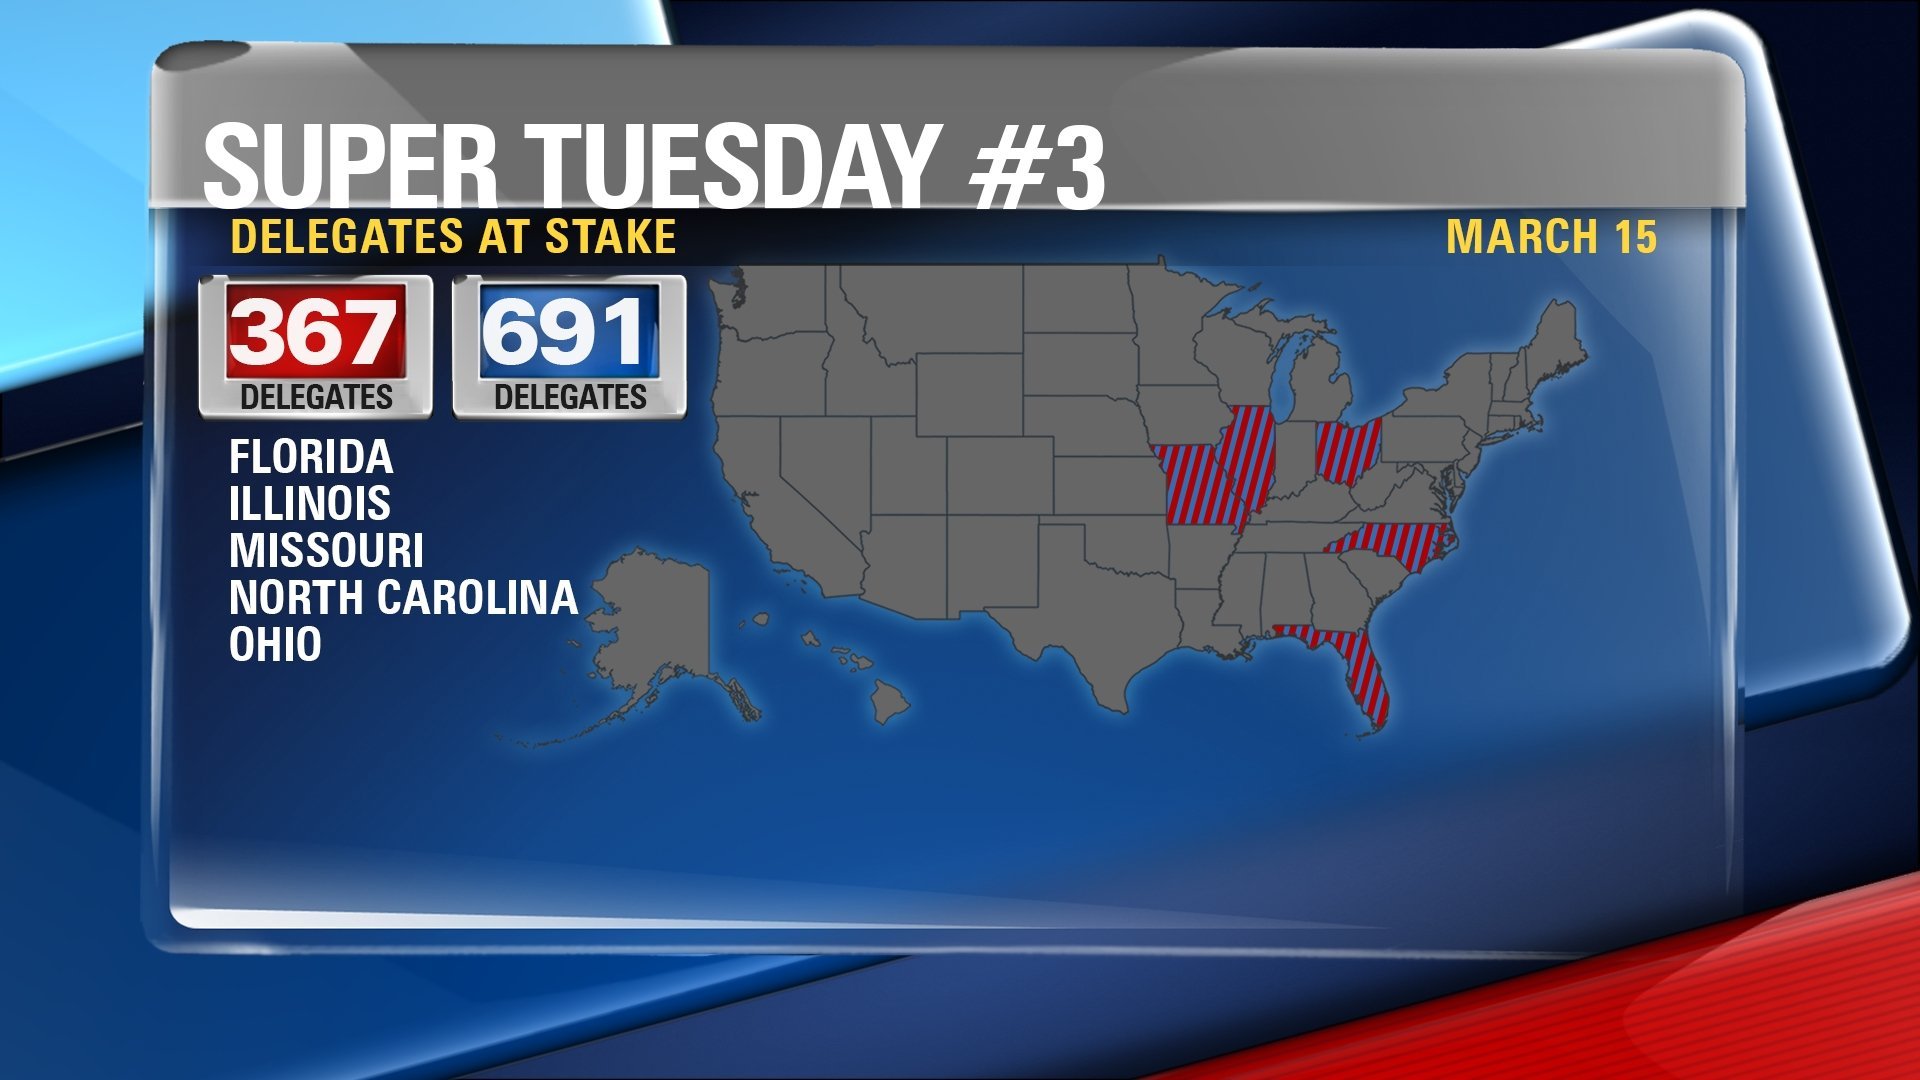 There are delegates at stake for both Republicans and Democrats as Super Tuesday #3 voting begins in Florida, Illinois, Missouri, North Carolina and Ohio.